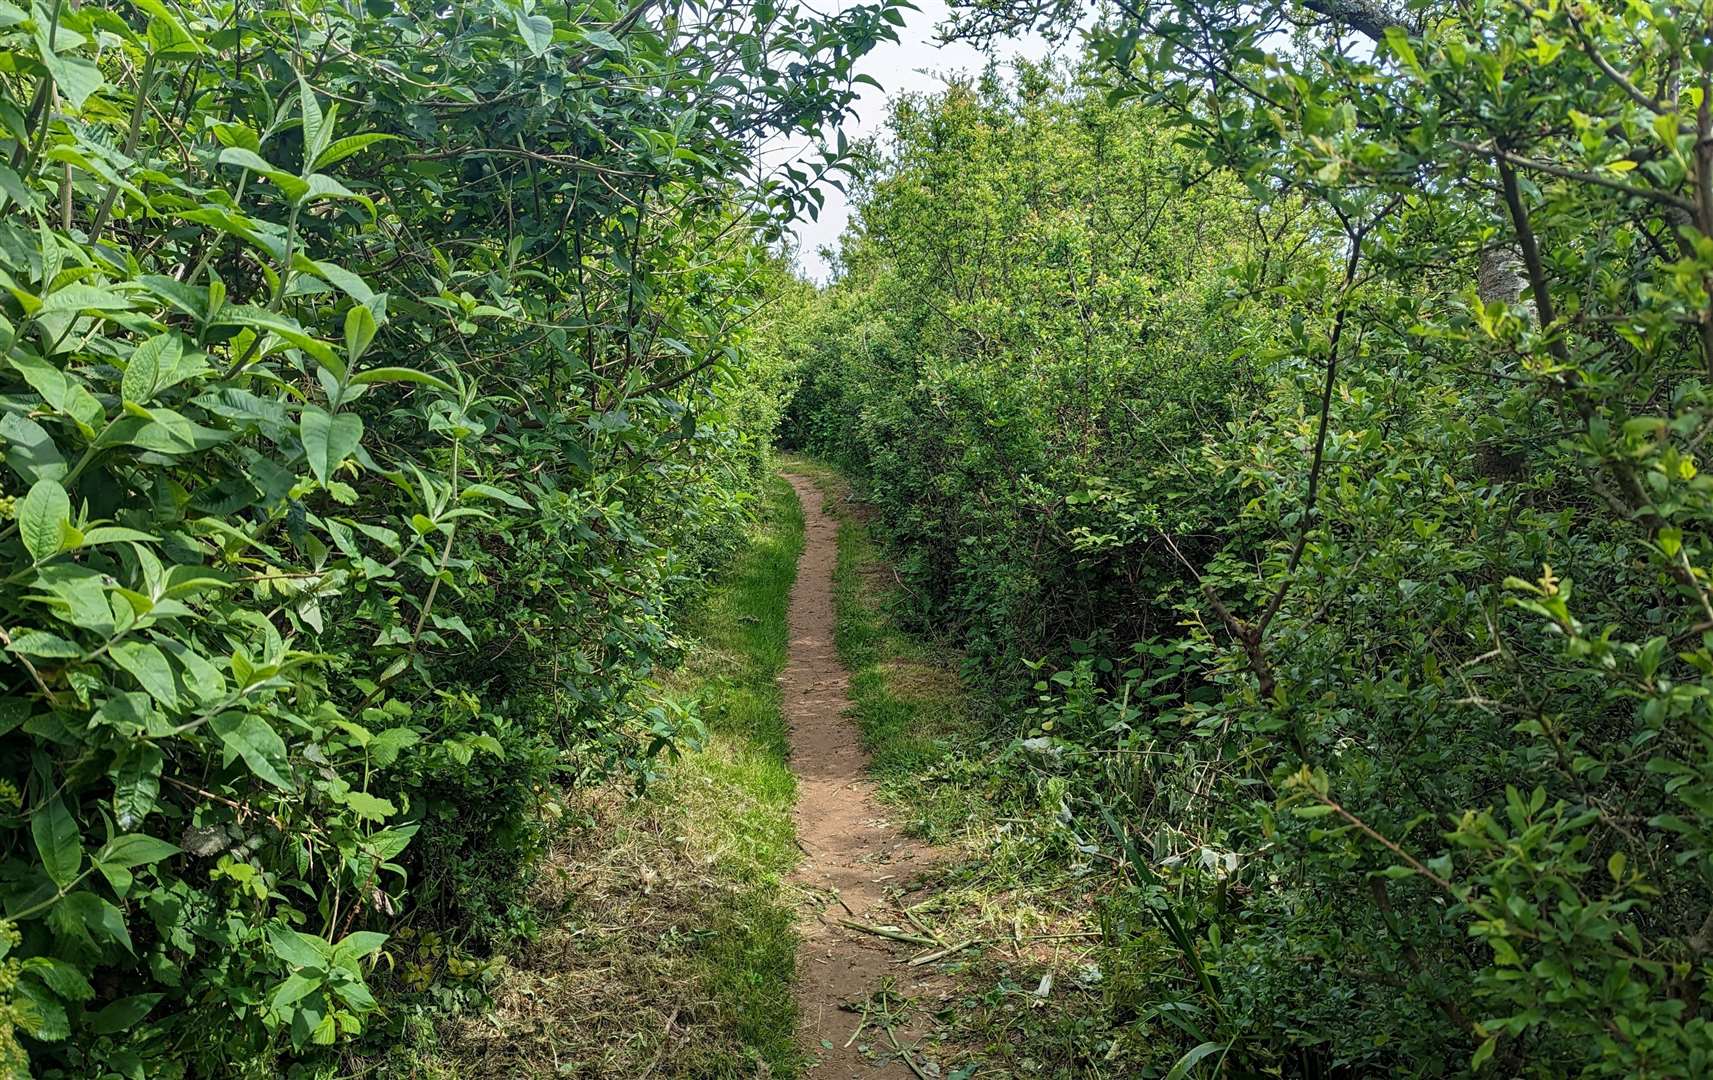 Parts of path wind through thick vegetation